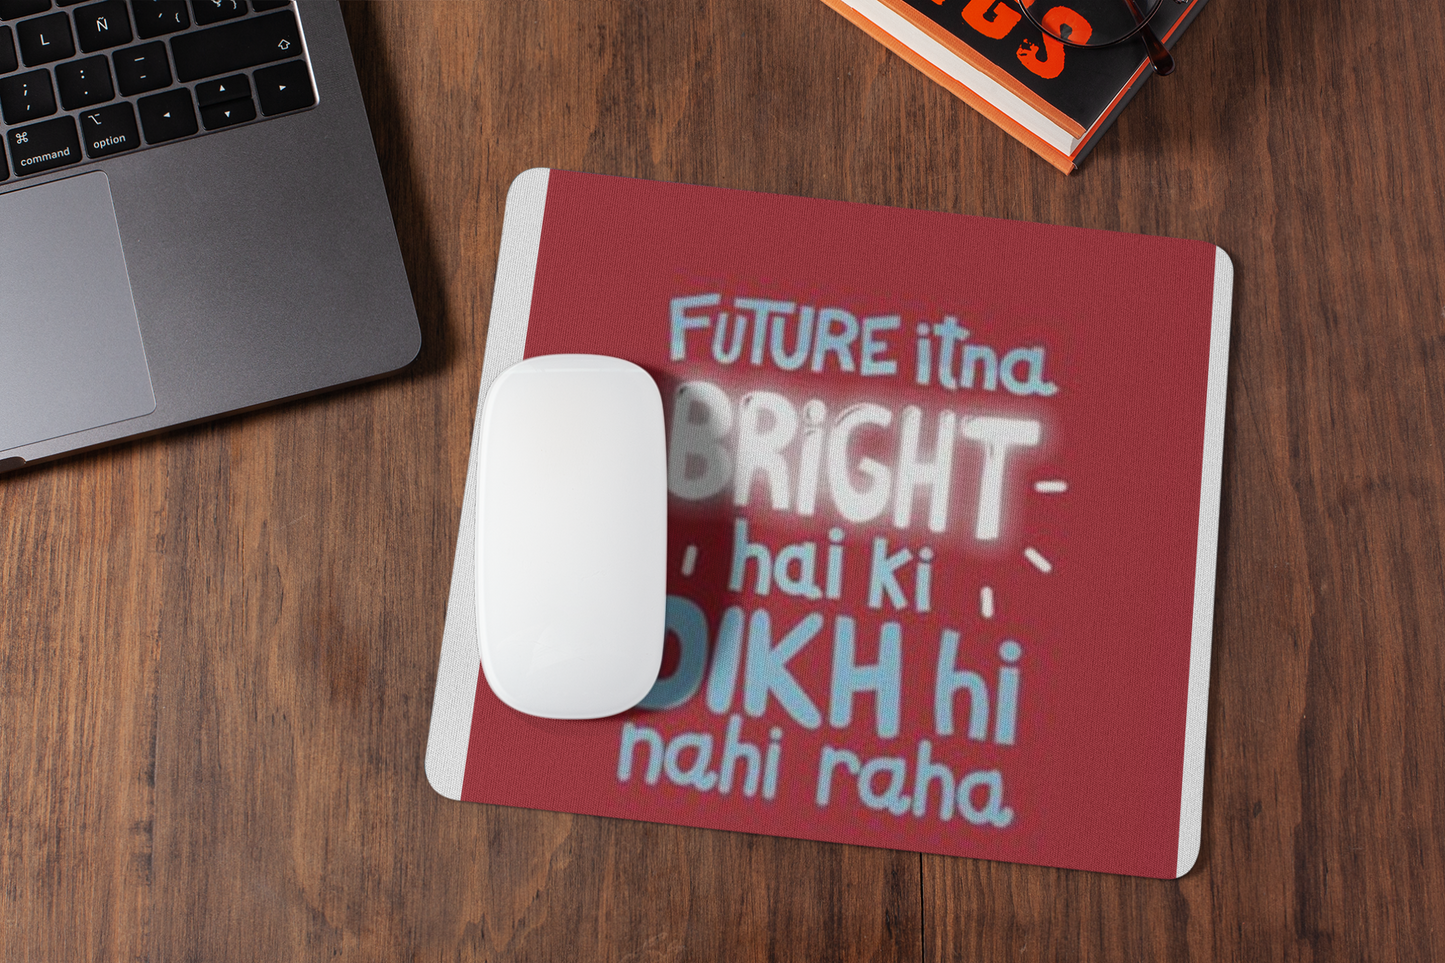 Future itna bright hai  mousepad for laptop and desktop with Rubber Base - Anti Skid